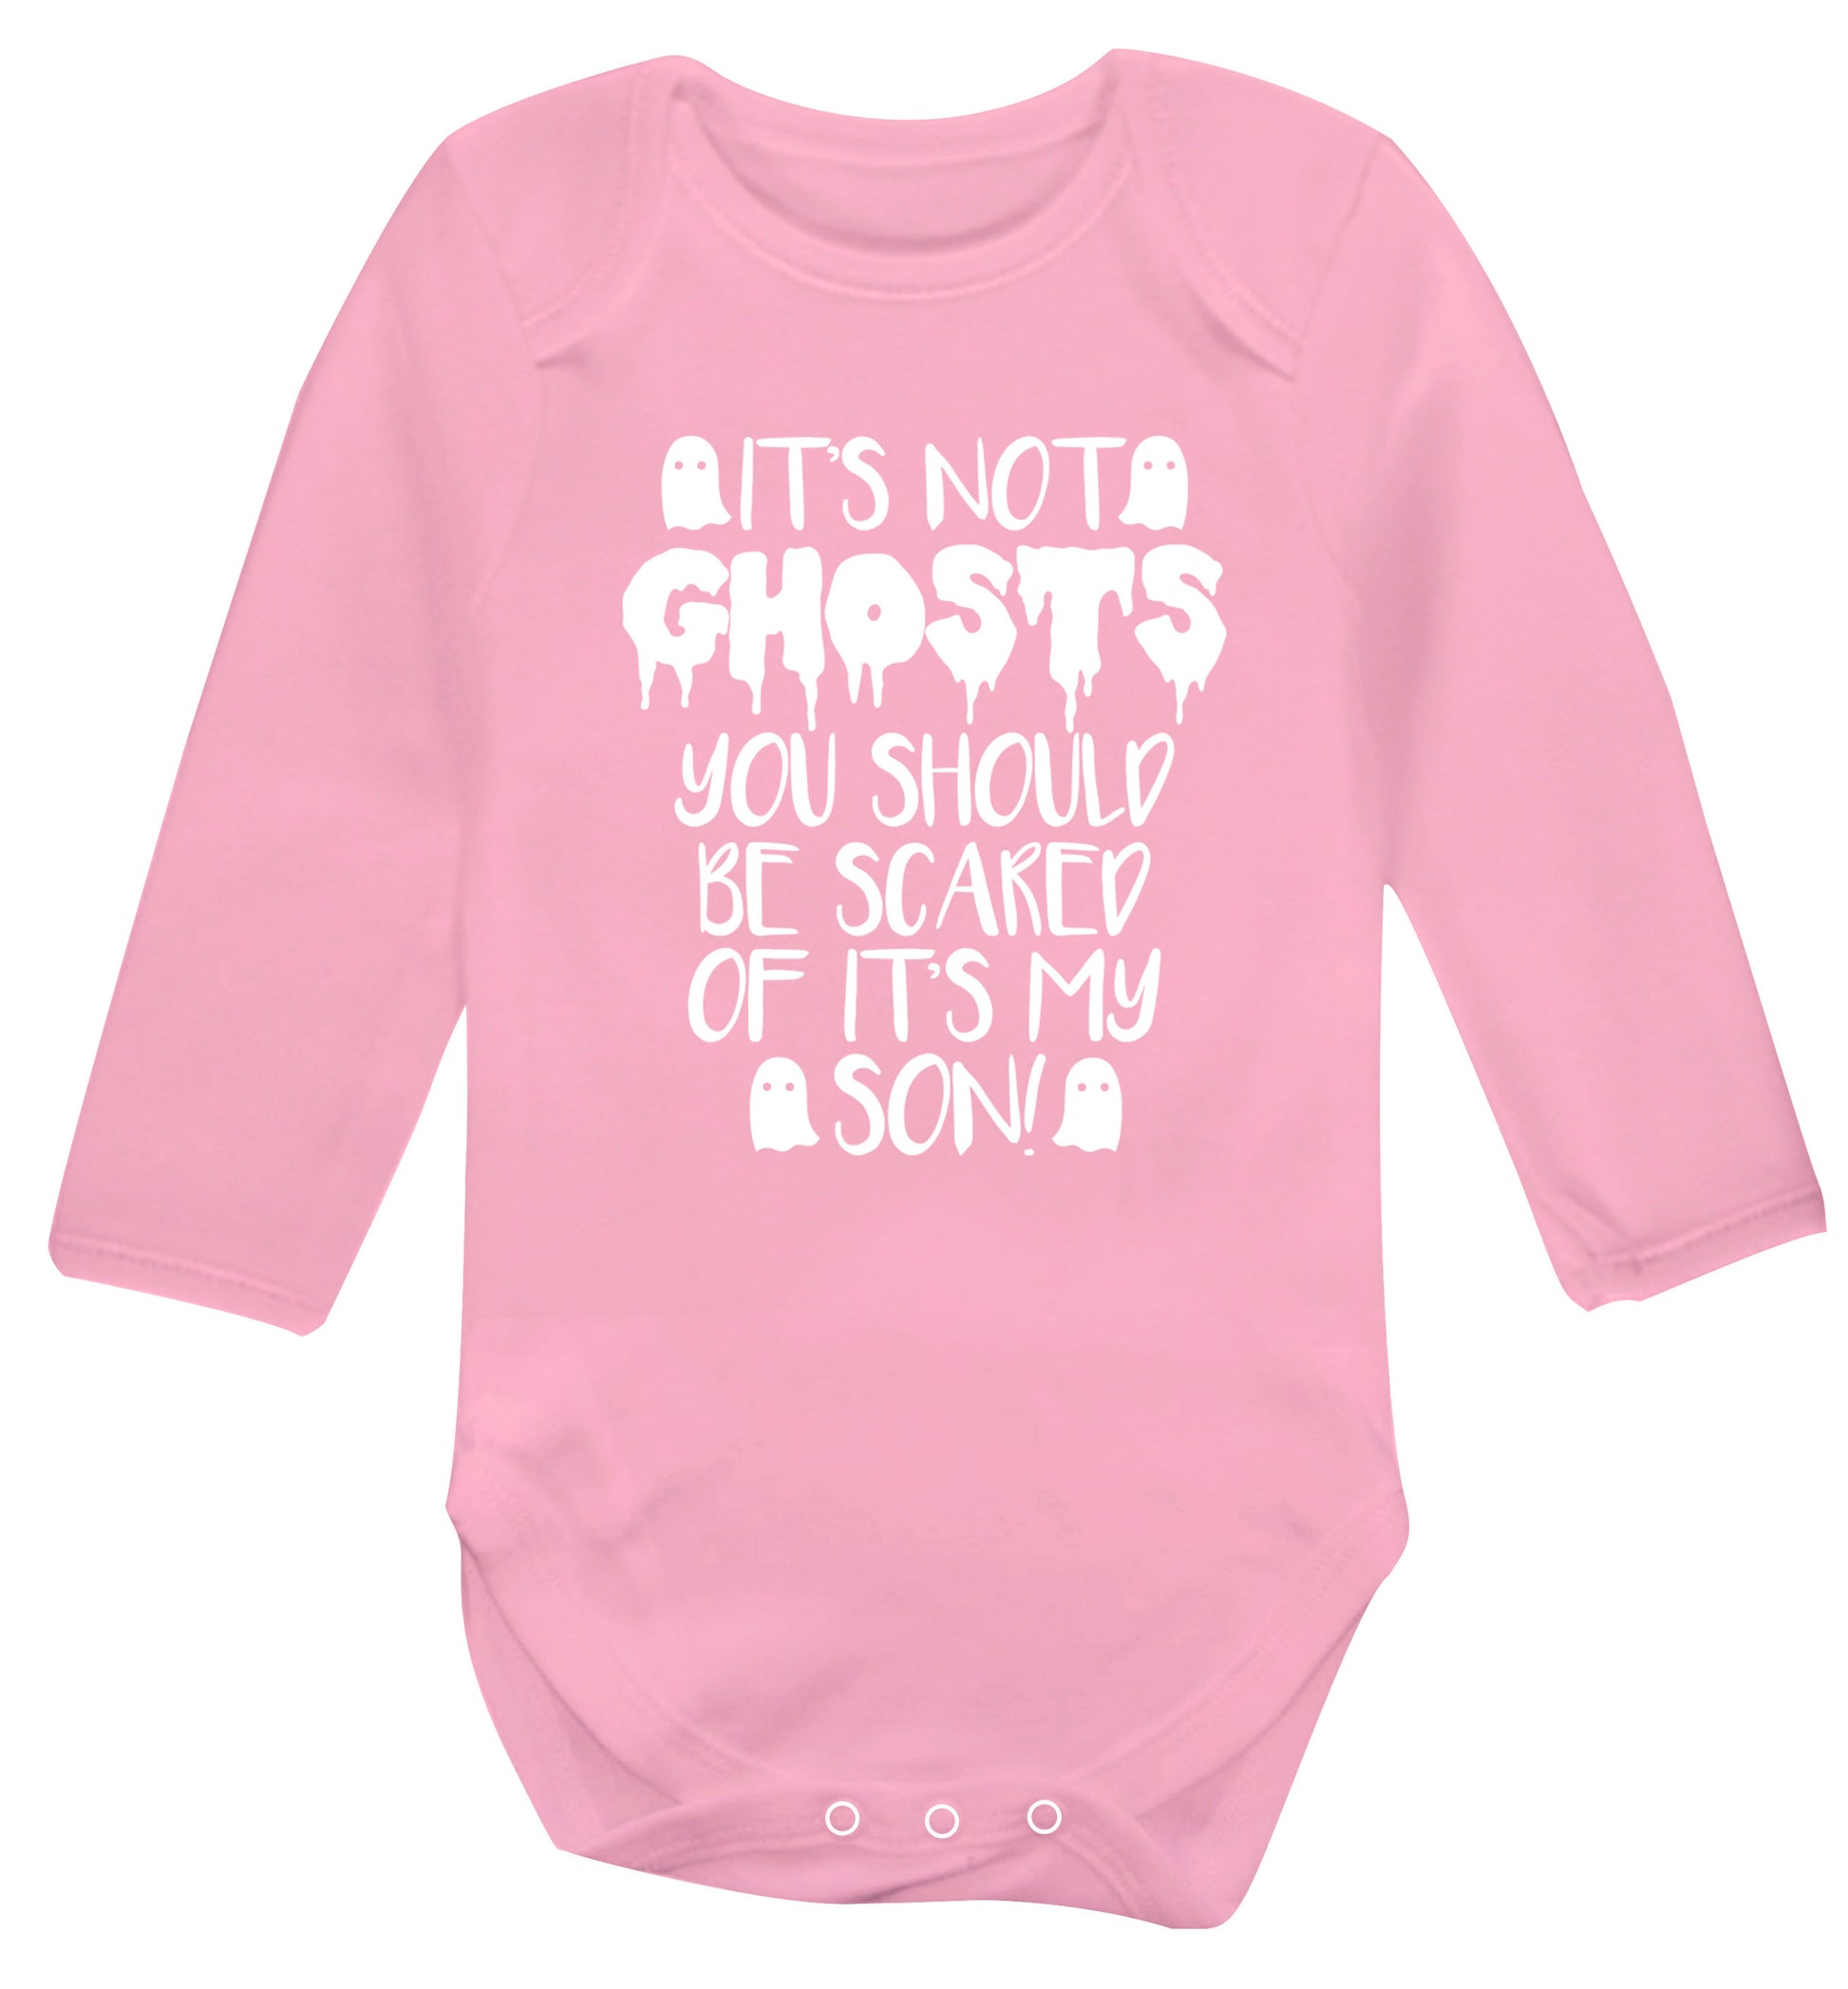 It's not ghosts you should be scared of it's my son! Baby Vest long sleeved pale pink 6-12 months